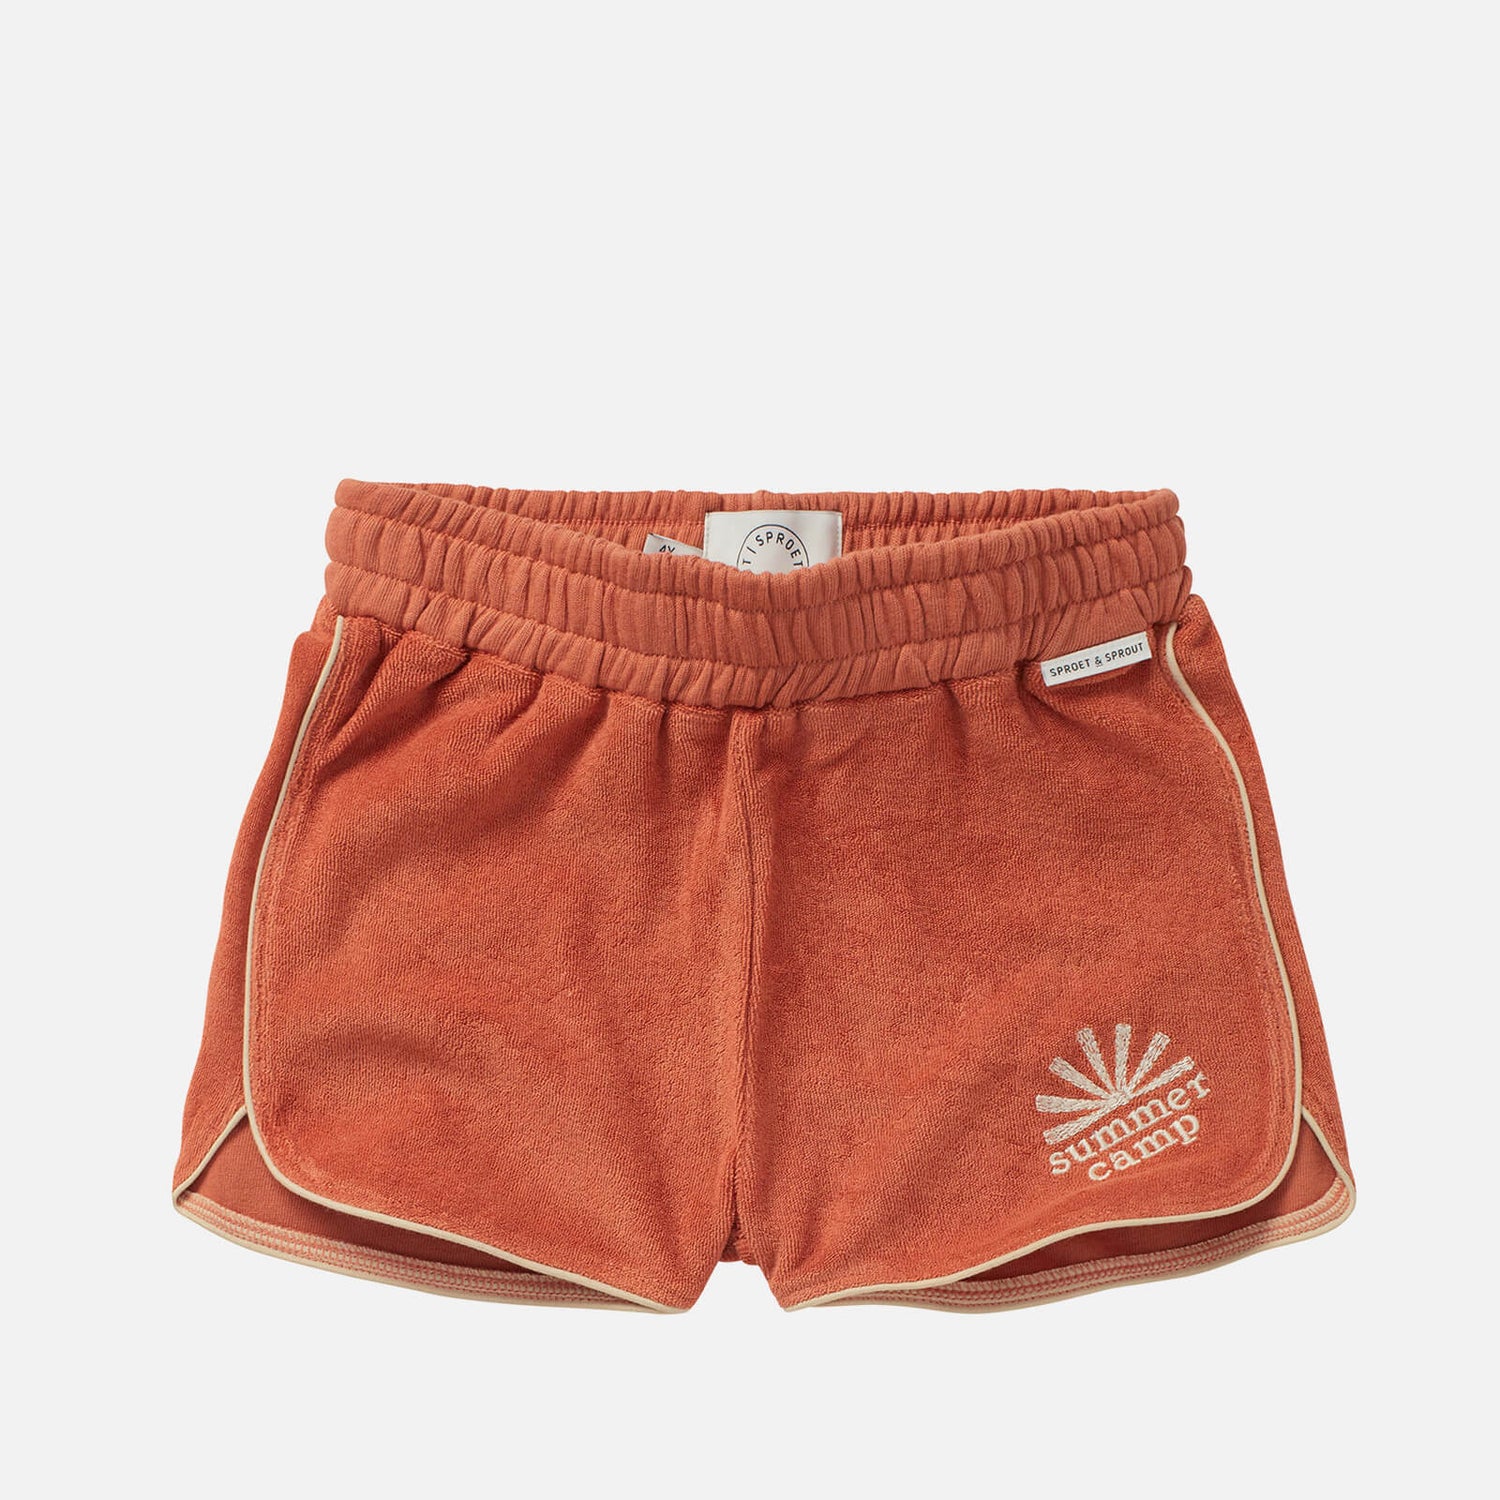 Sproet + Sprout Kids' Terry Sport Shorts - Summer Camp - Cafe - 12 Months